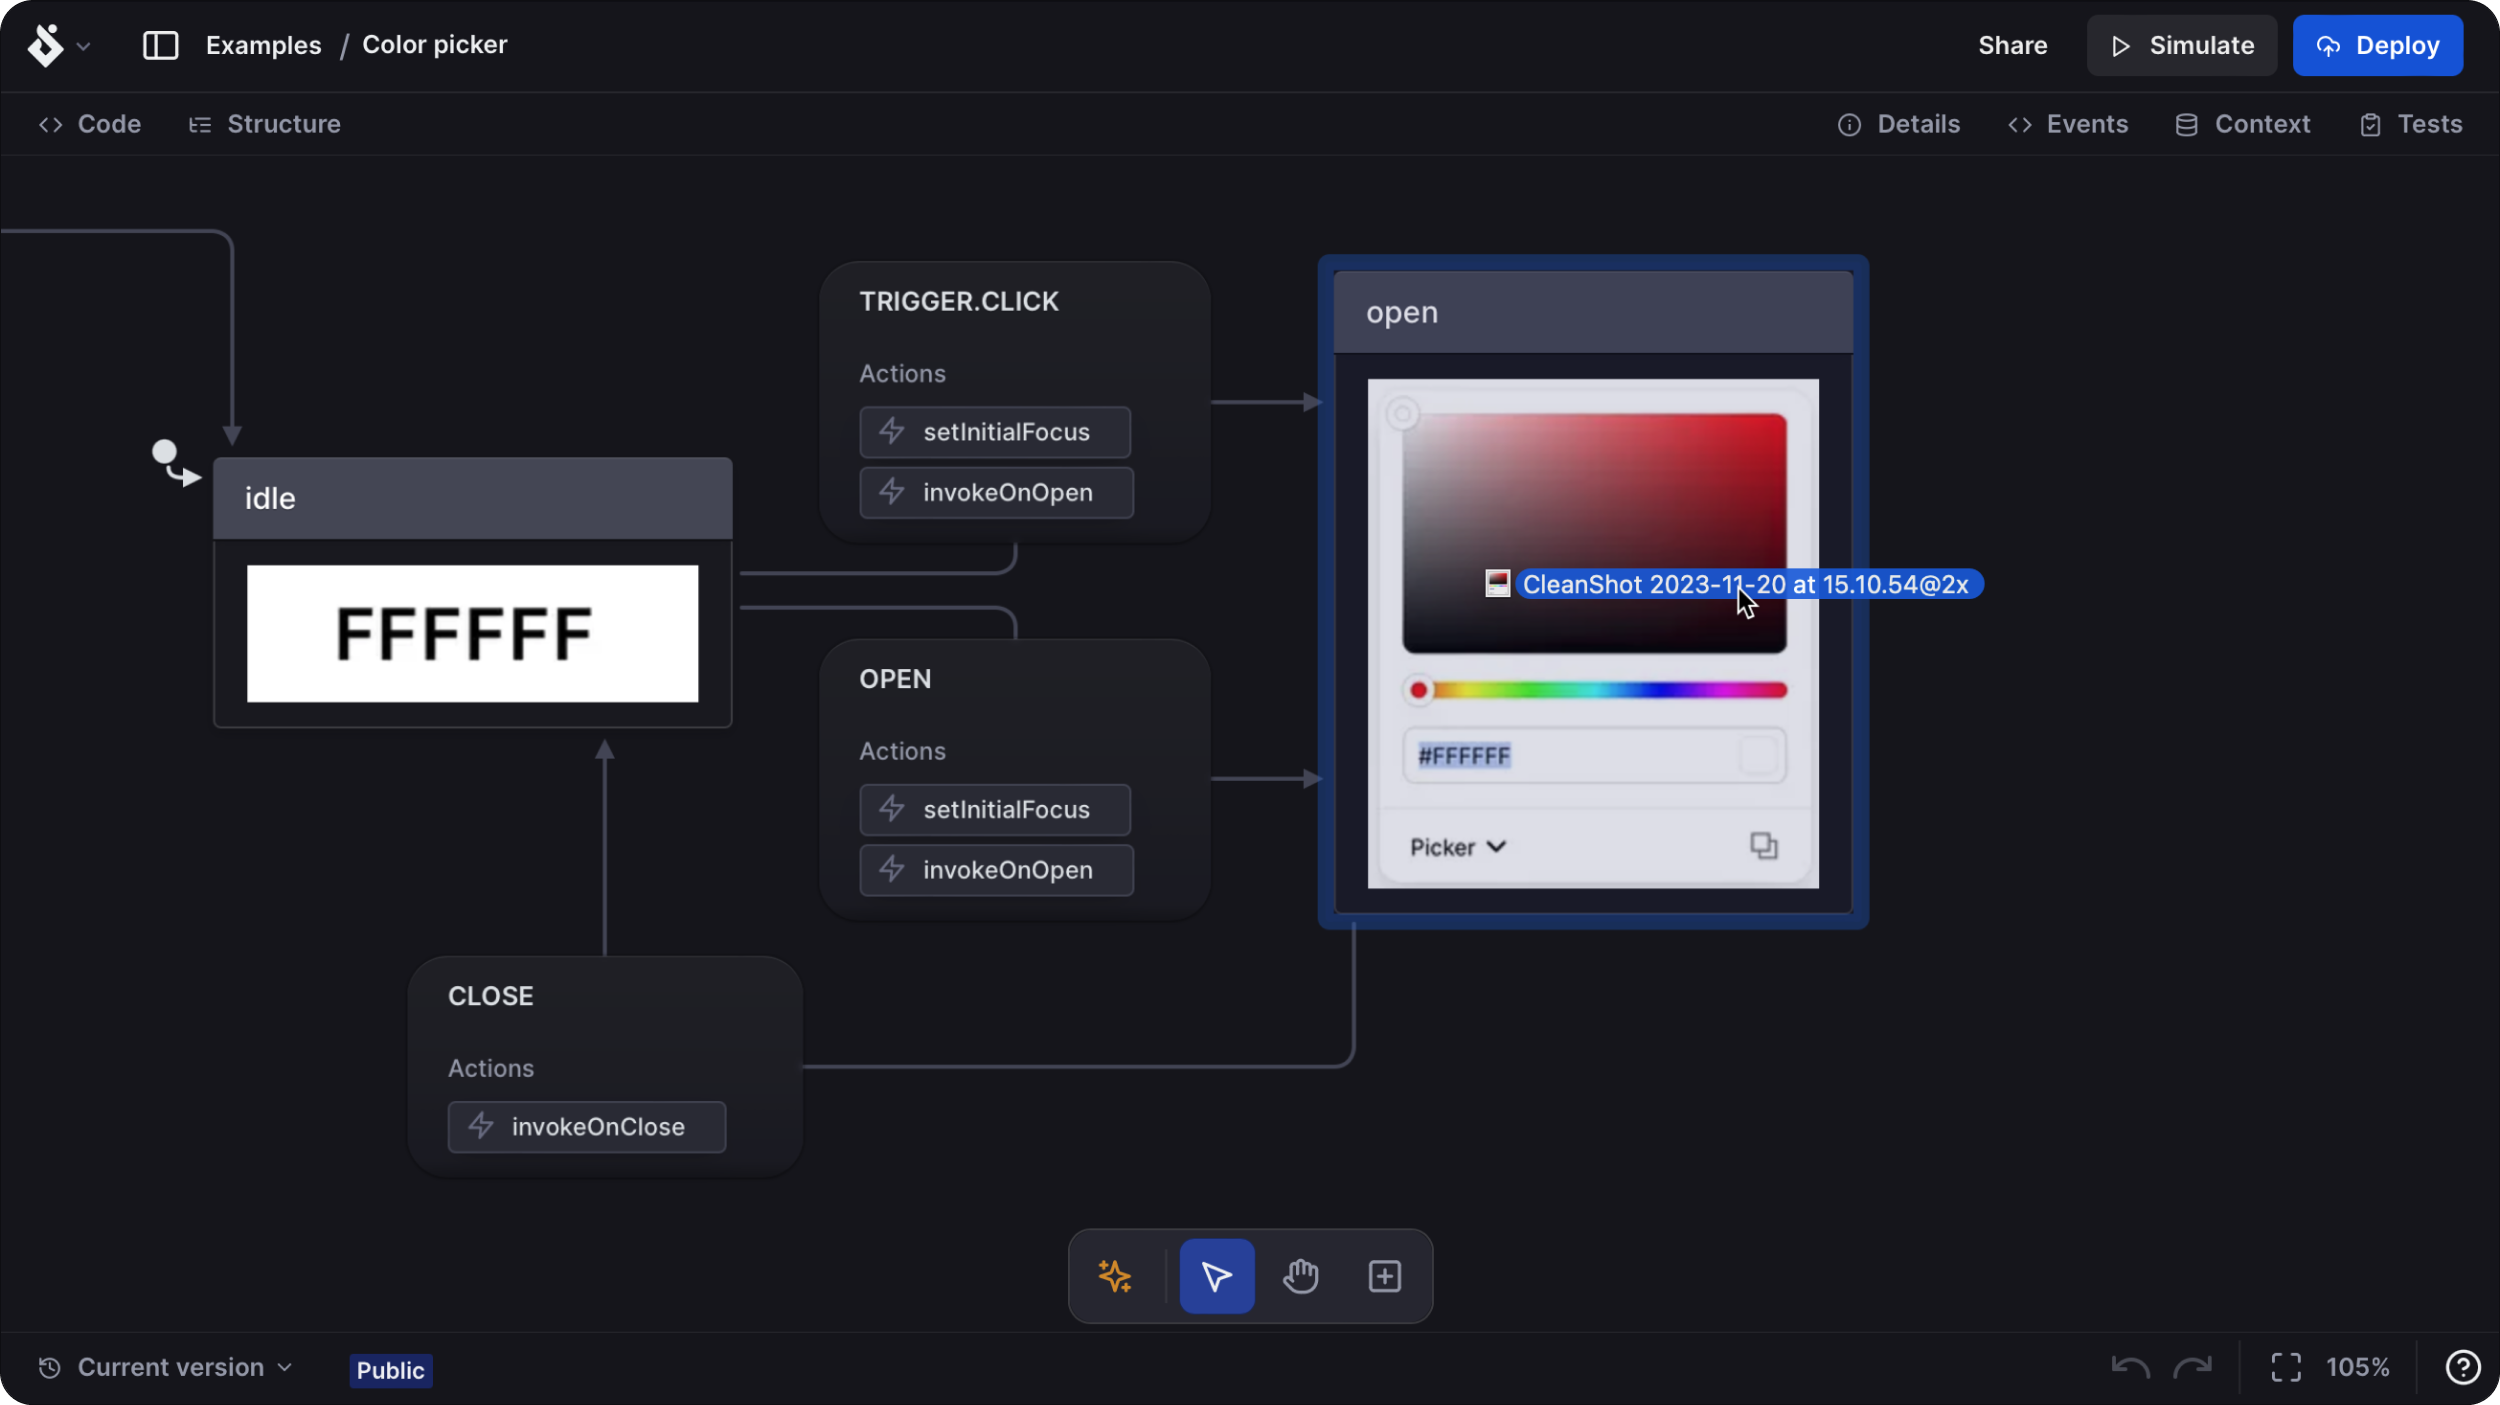 State machine for a color picker where an image of an expanded color picker is being dragged into the open state.